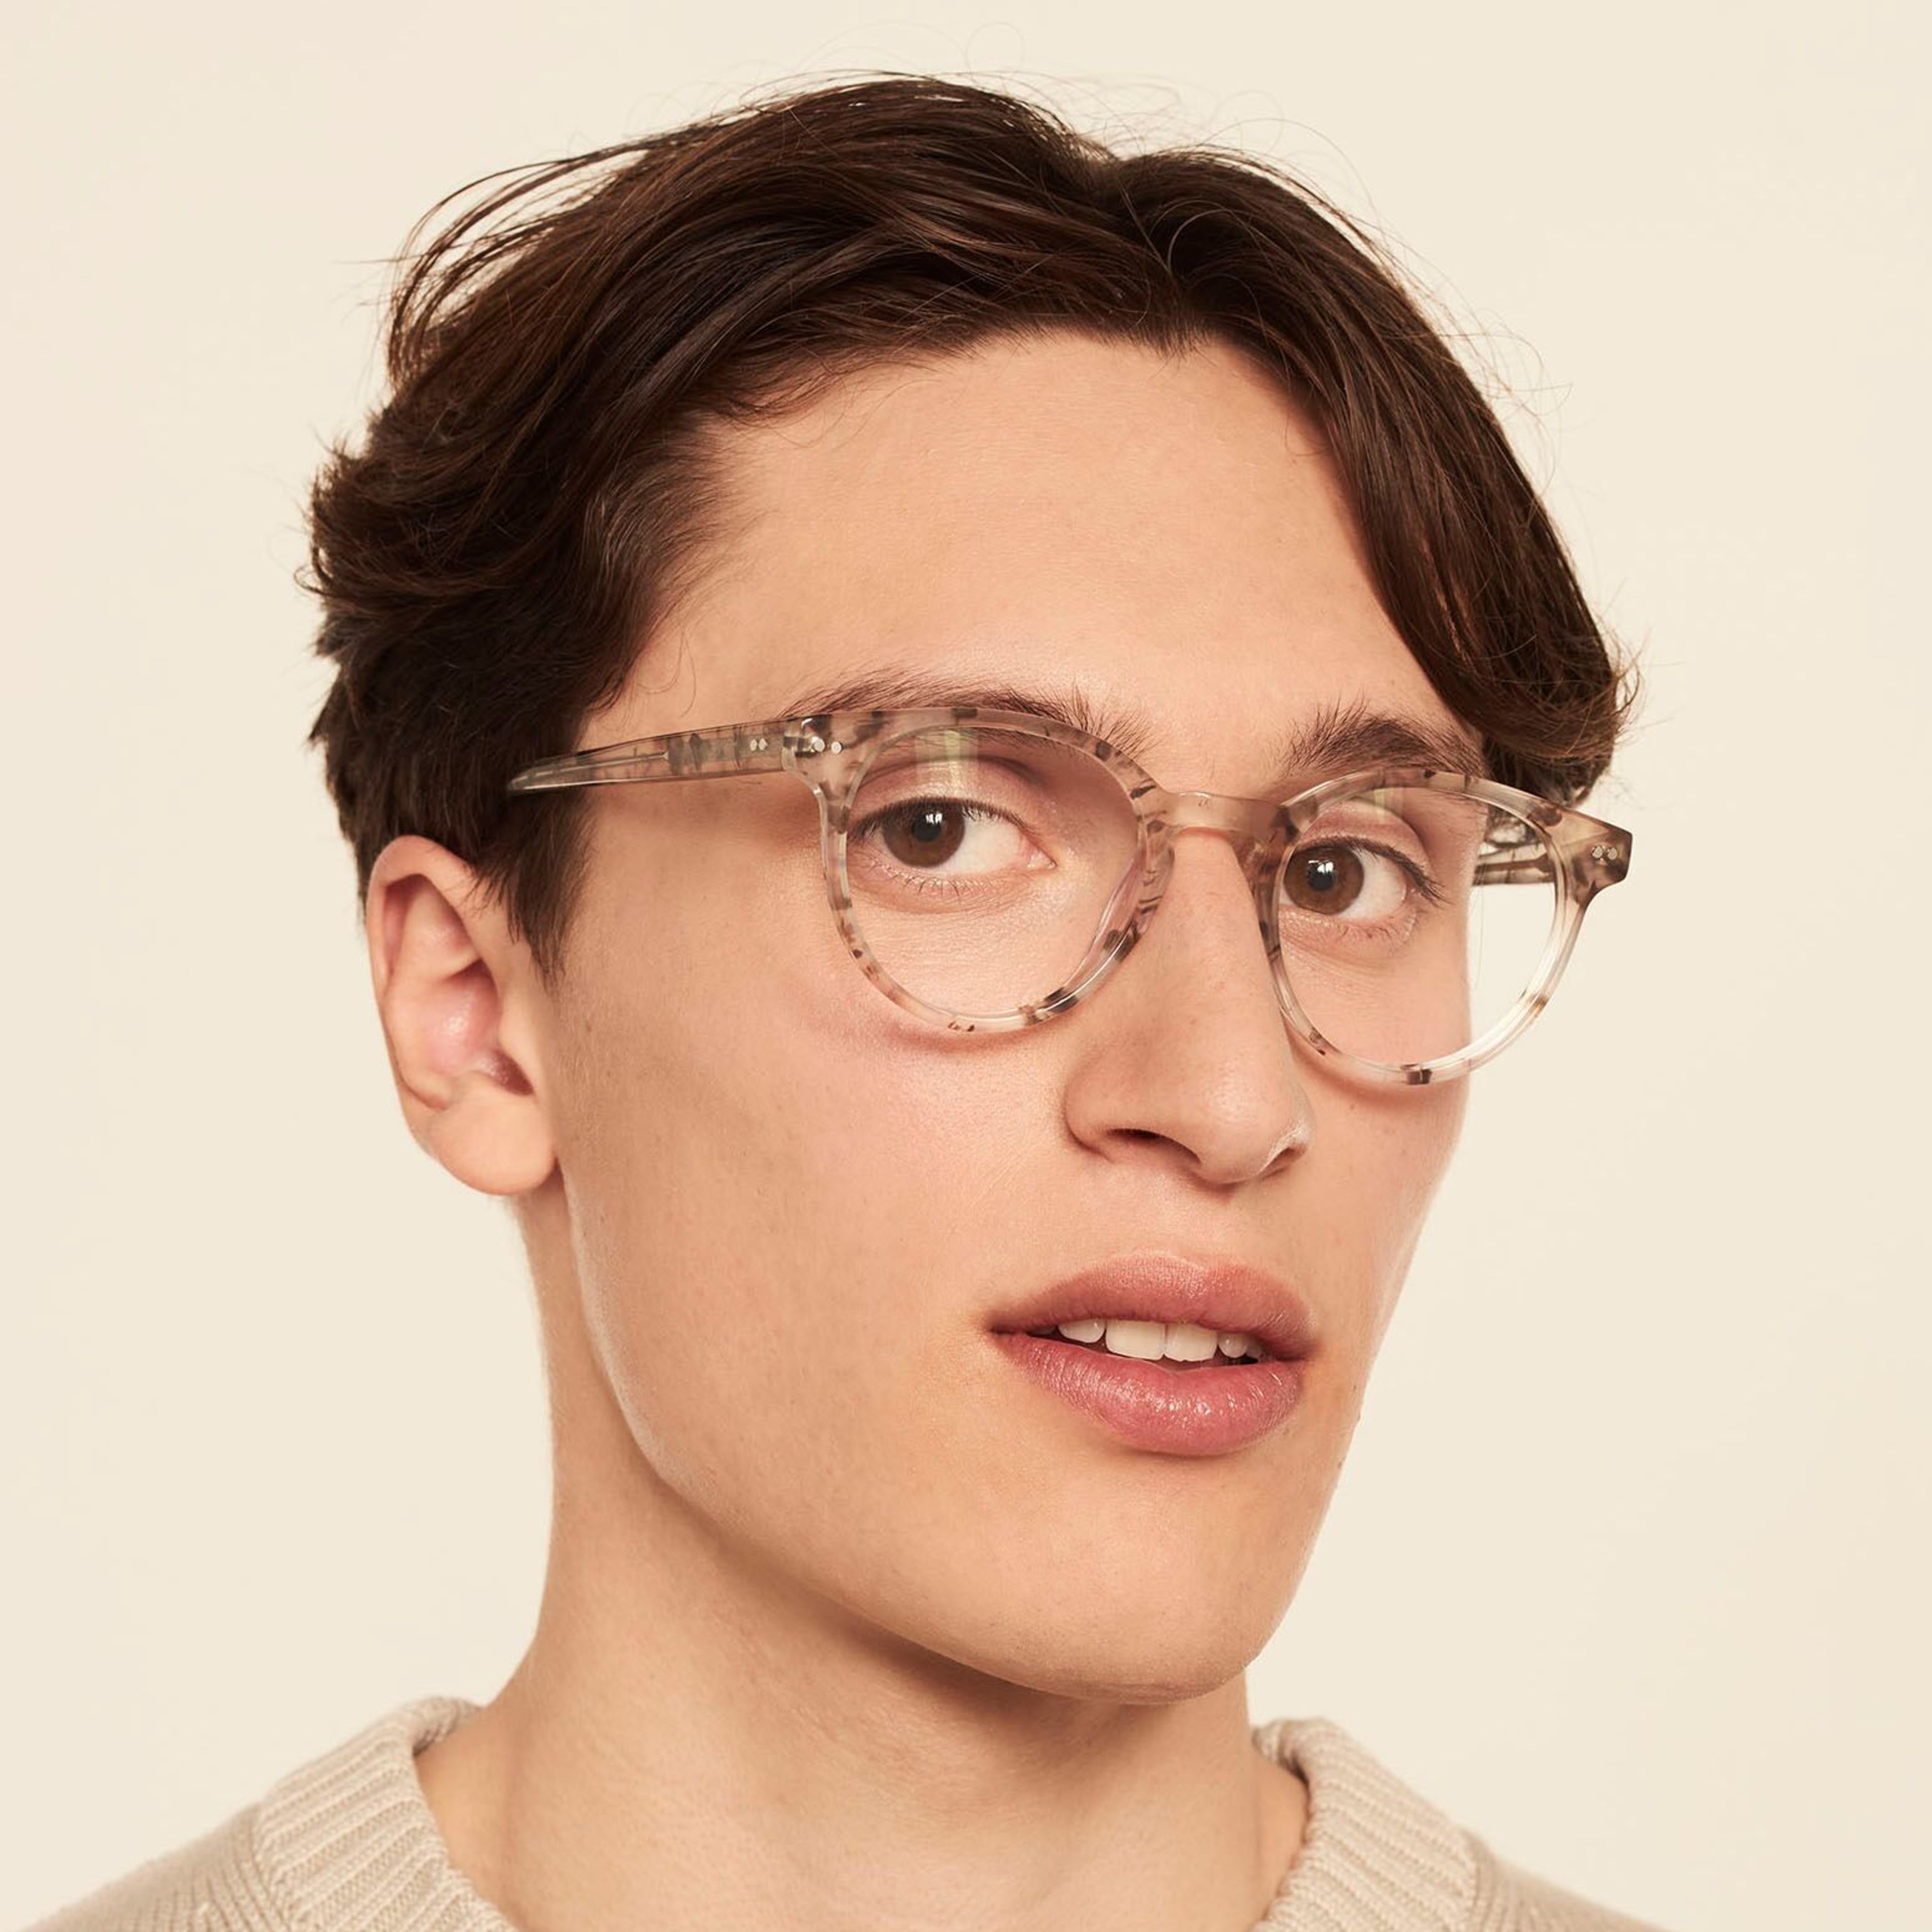 Ace & Tate Glasses | round acetate in Brown, Grey, White